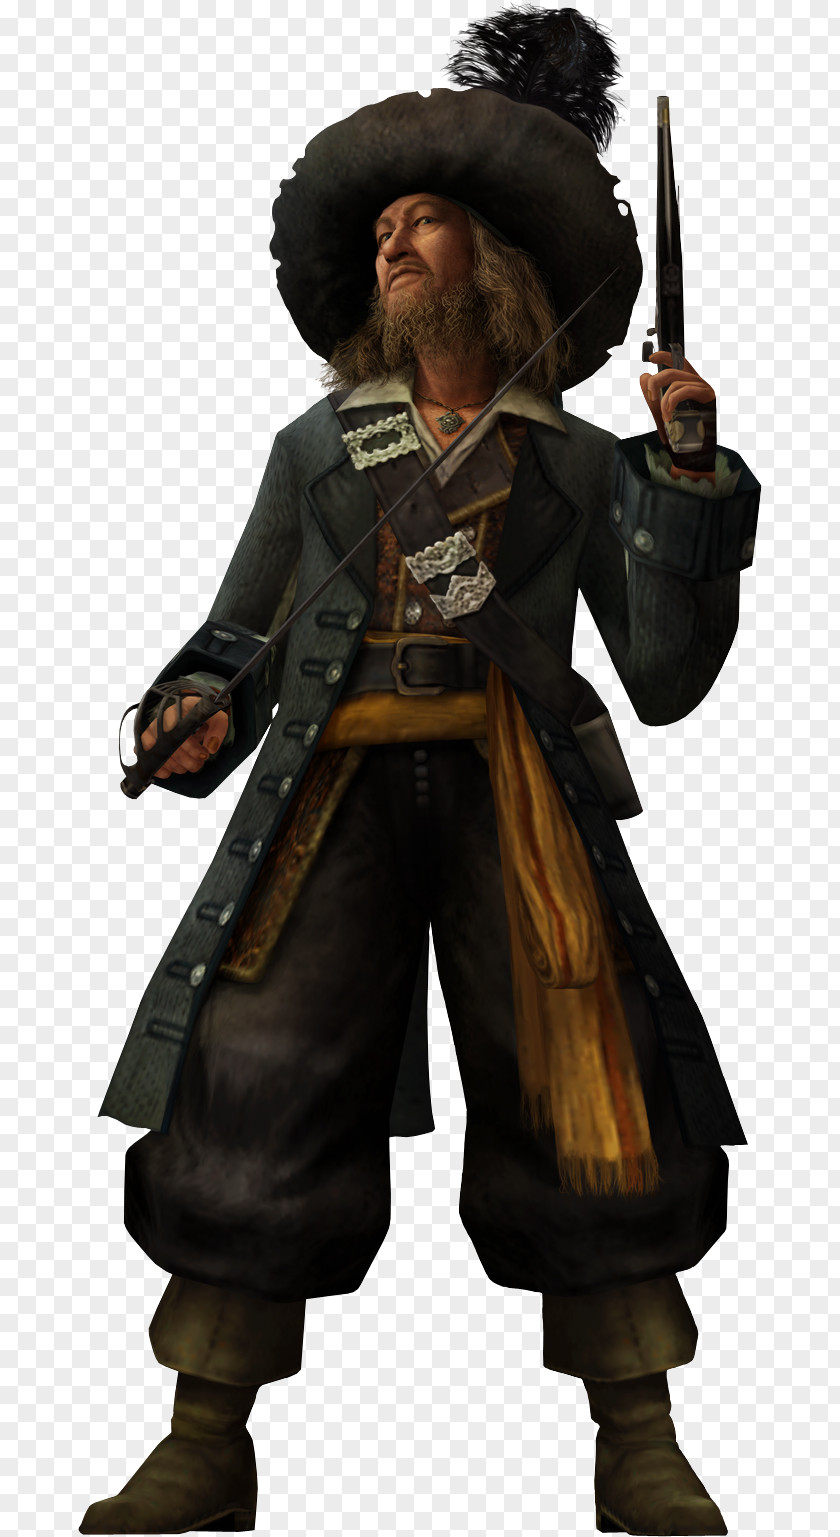 Jack Hector Barbossa Kingdom Hearts II Sparrow Pirates Of The Caribbean: Curse Black Pearl Captain Hook PNG